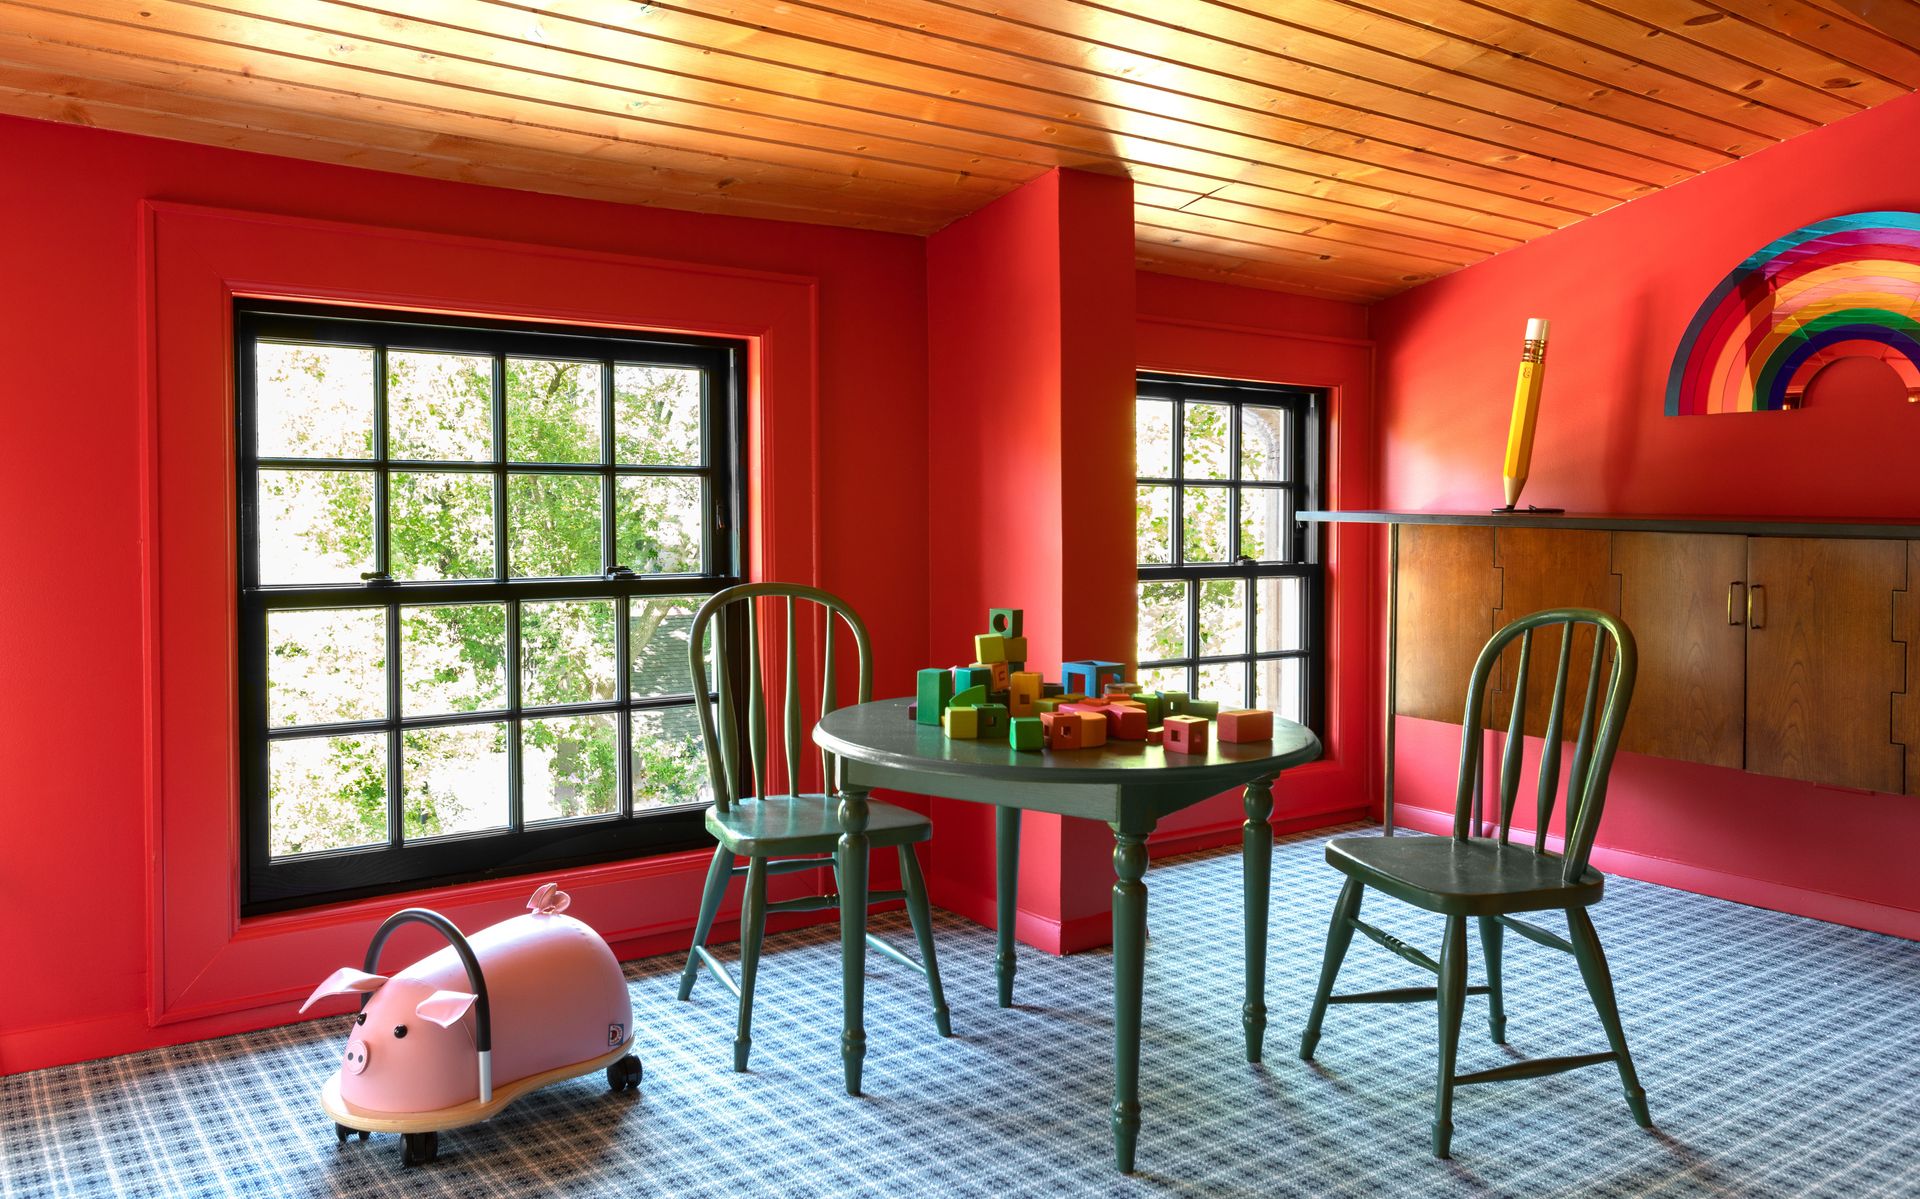 <p>                     The best thing about playroom designs is that you can really go wild with color choices – those combinations you wouldn’t normally use can be set free. Take this fun playroom by M. Lavender Interiors as an example: bright scarlet walls teamed with black window frames, forest green painted furniture and a plaid carpet. Painted surfaces can easily be wiped clean too, or painted over if little hands start drawing on the walls.                   </p>                                      <p>                     Mark Lavender, of M Lavender Interiors, explains the brief for this playroom for two children: ‘The third floor attic space was converted into a playroom for our client’s two children. We took advantage of this dormer area to provide a quiet place for reading or viewing out the window for the parents while their kids were playing in the rest of the space. It also serves as a place of respite from the hustle and bustle of the house if the rest of the family is downstairs.’                   </p>